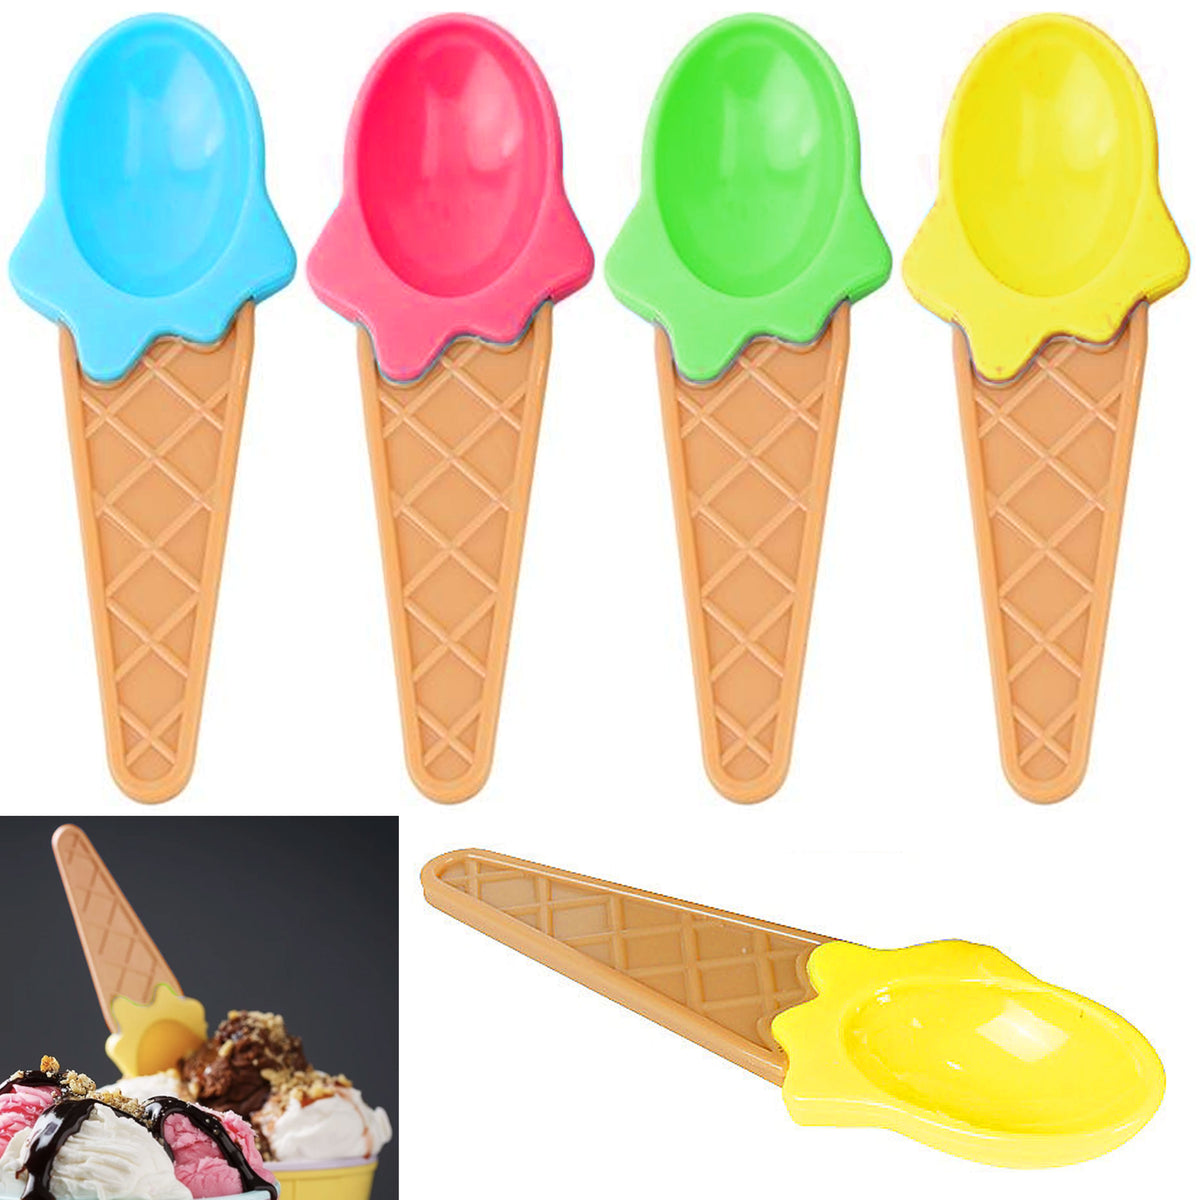 4 Pc Ice Cream Cone Shaped Tray Silicone Soap Mold Candy Chocolate